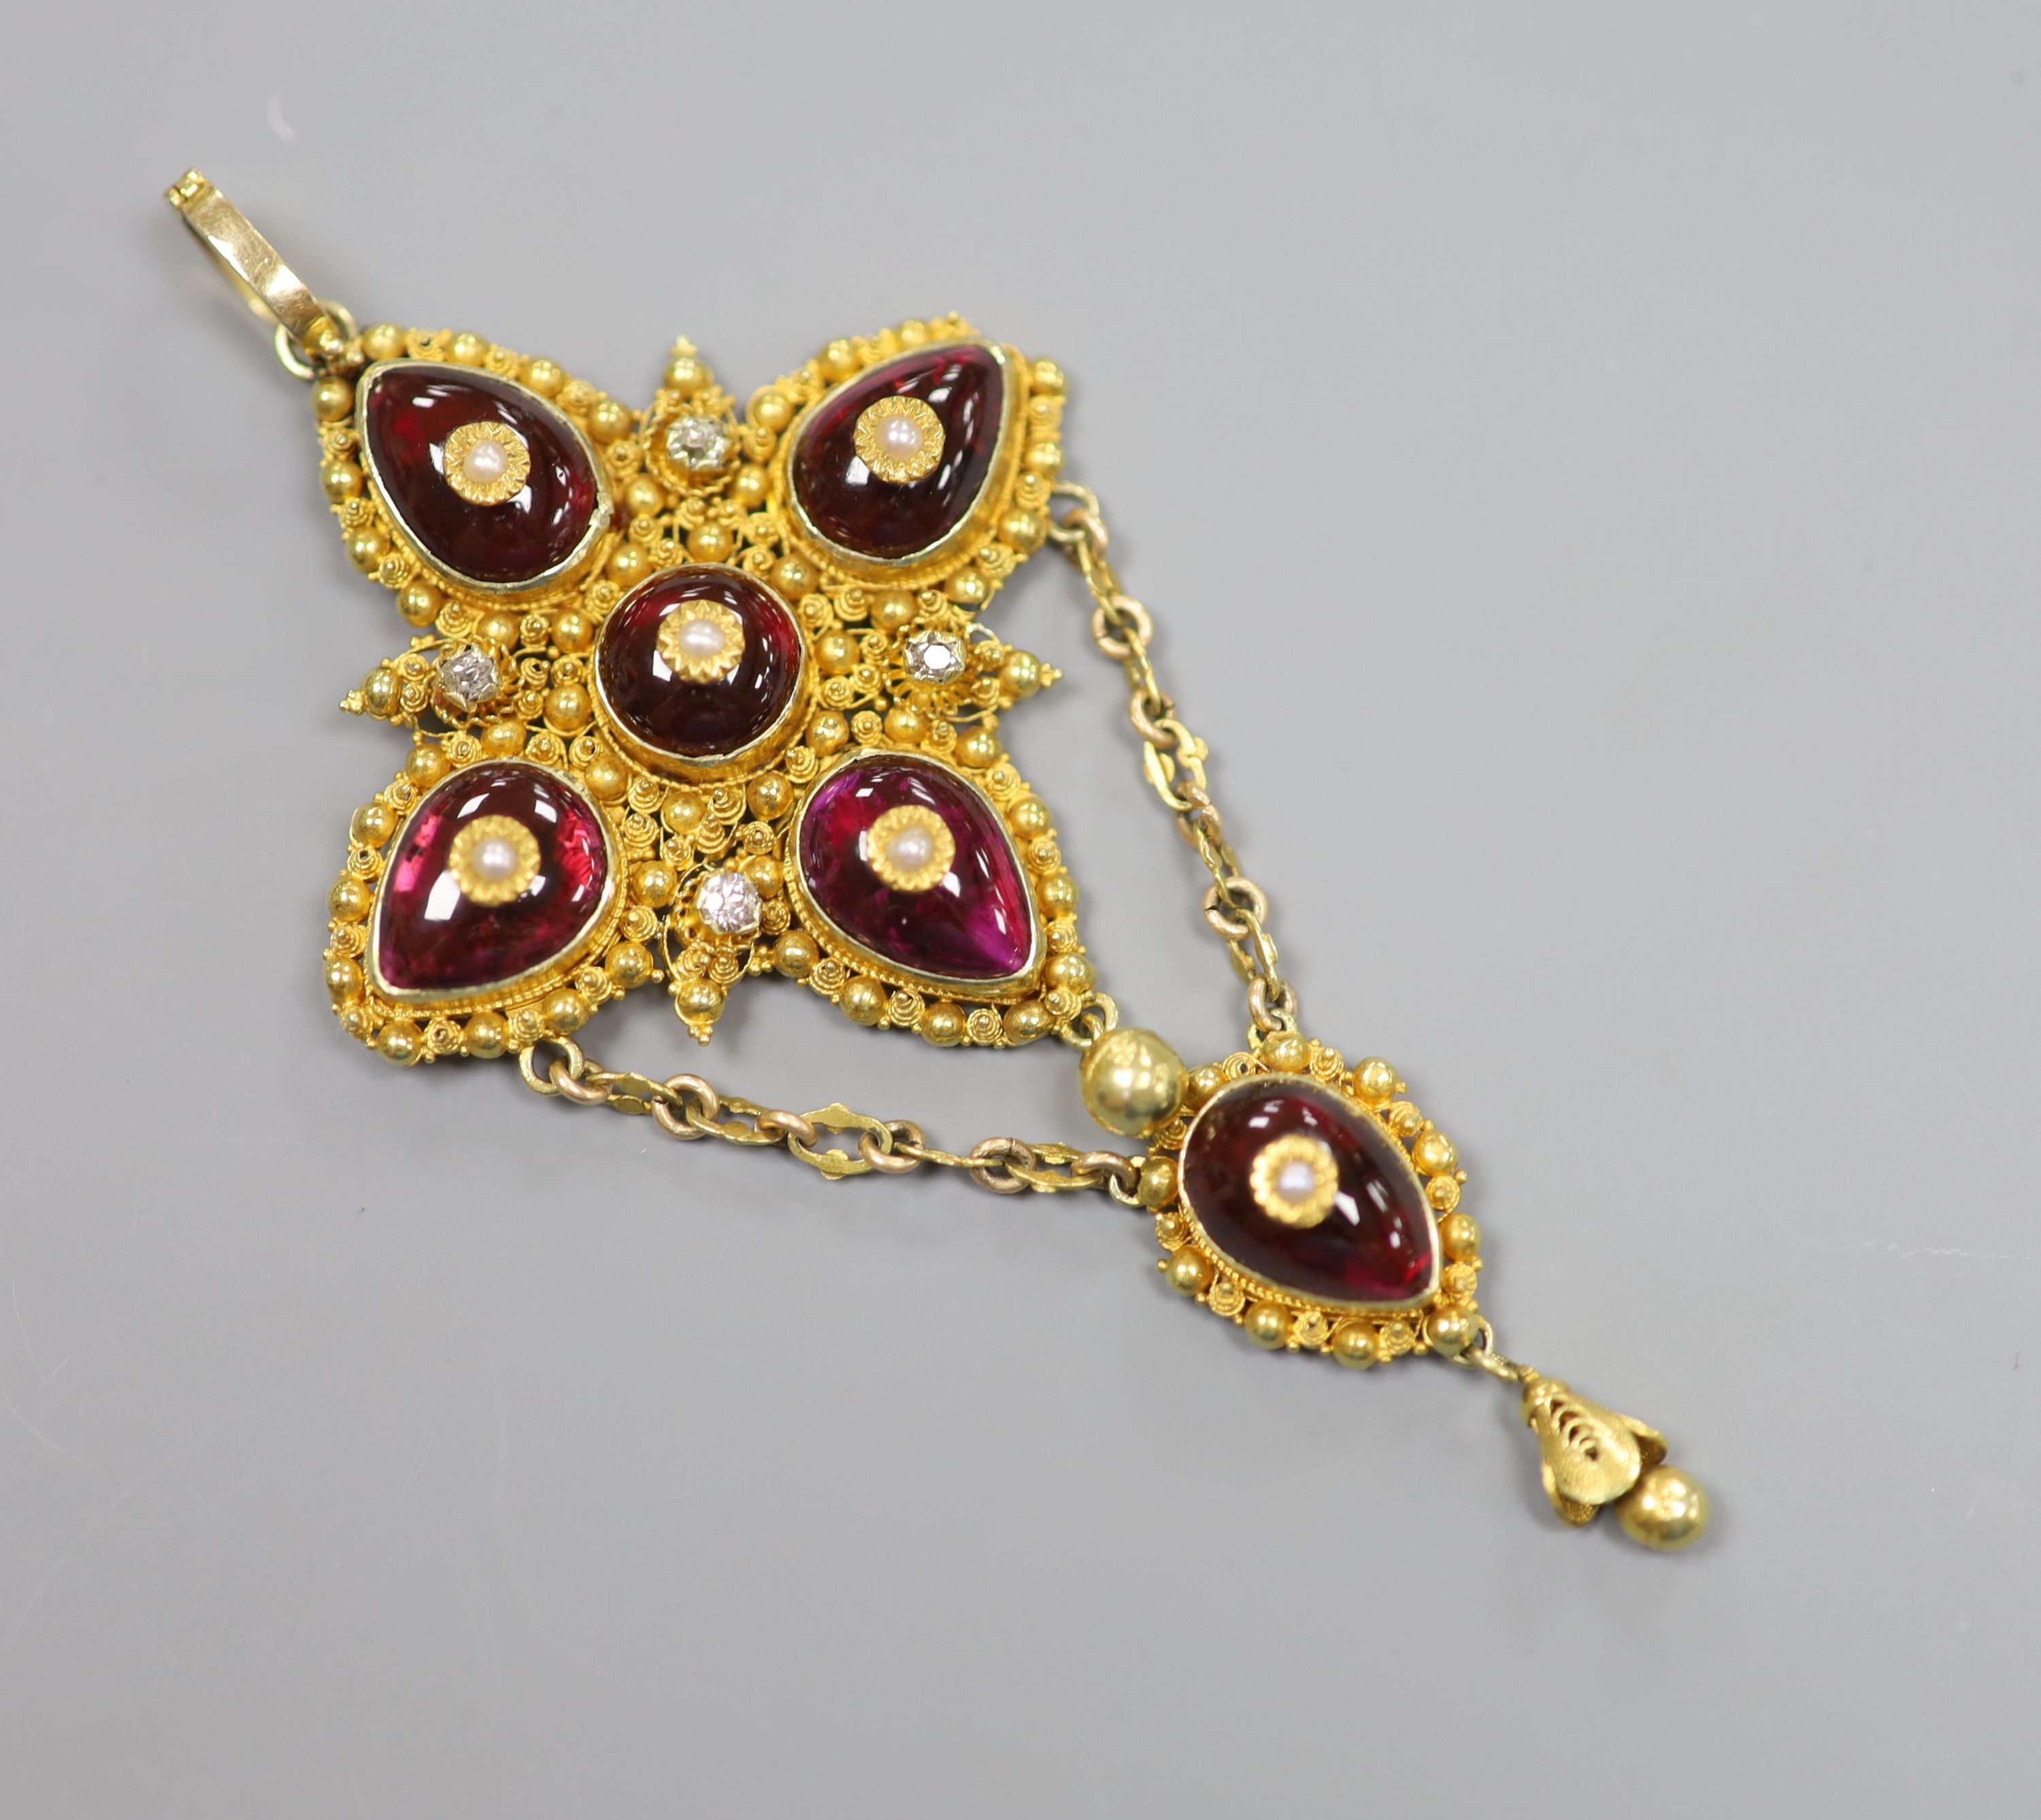 A 19th century yellow metal, foil backed garnet, seed pearl and diamond set drop pendant (adapted)